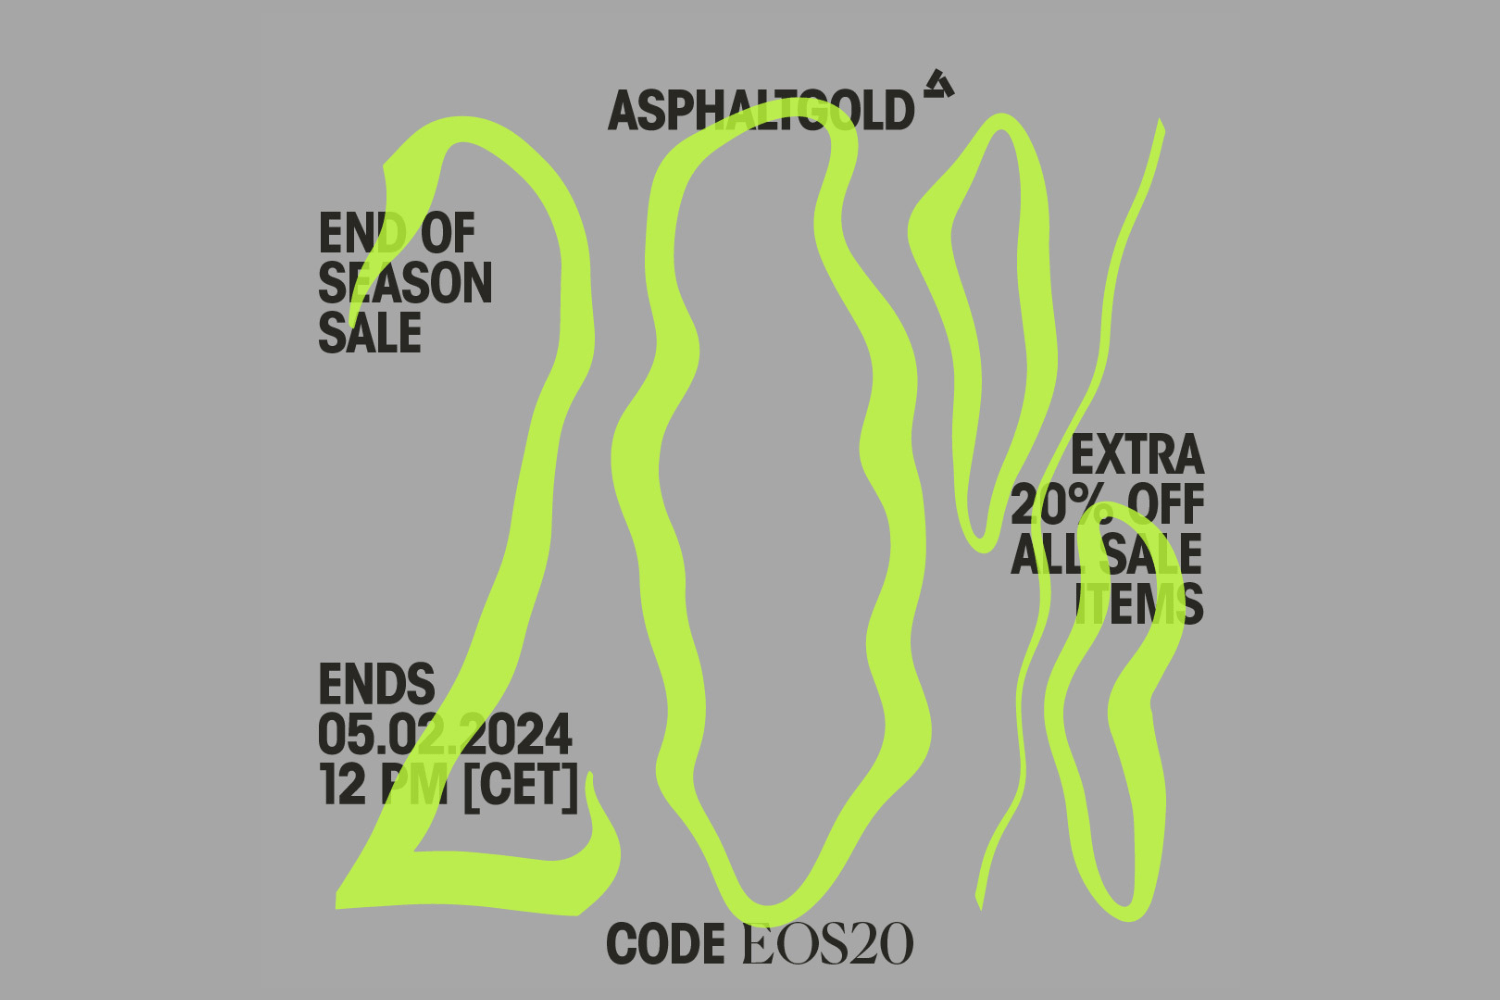 Profit of high discounts at the Asphaltgold End of Season Sale